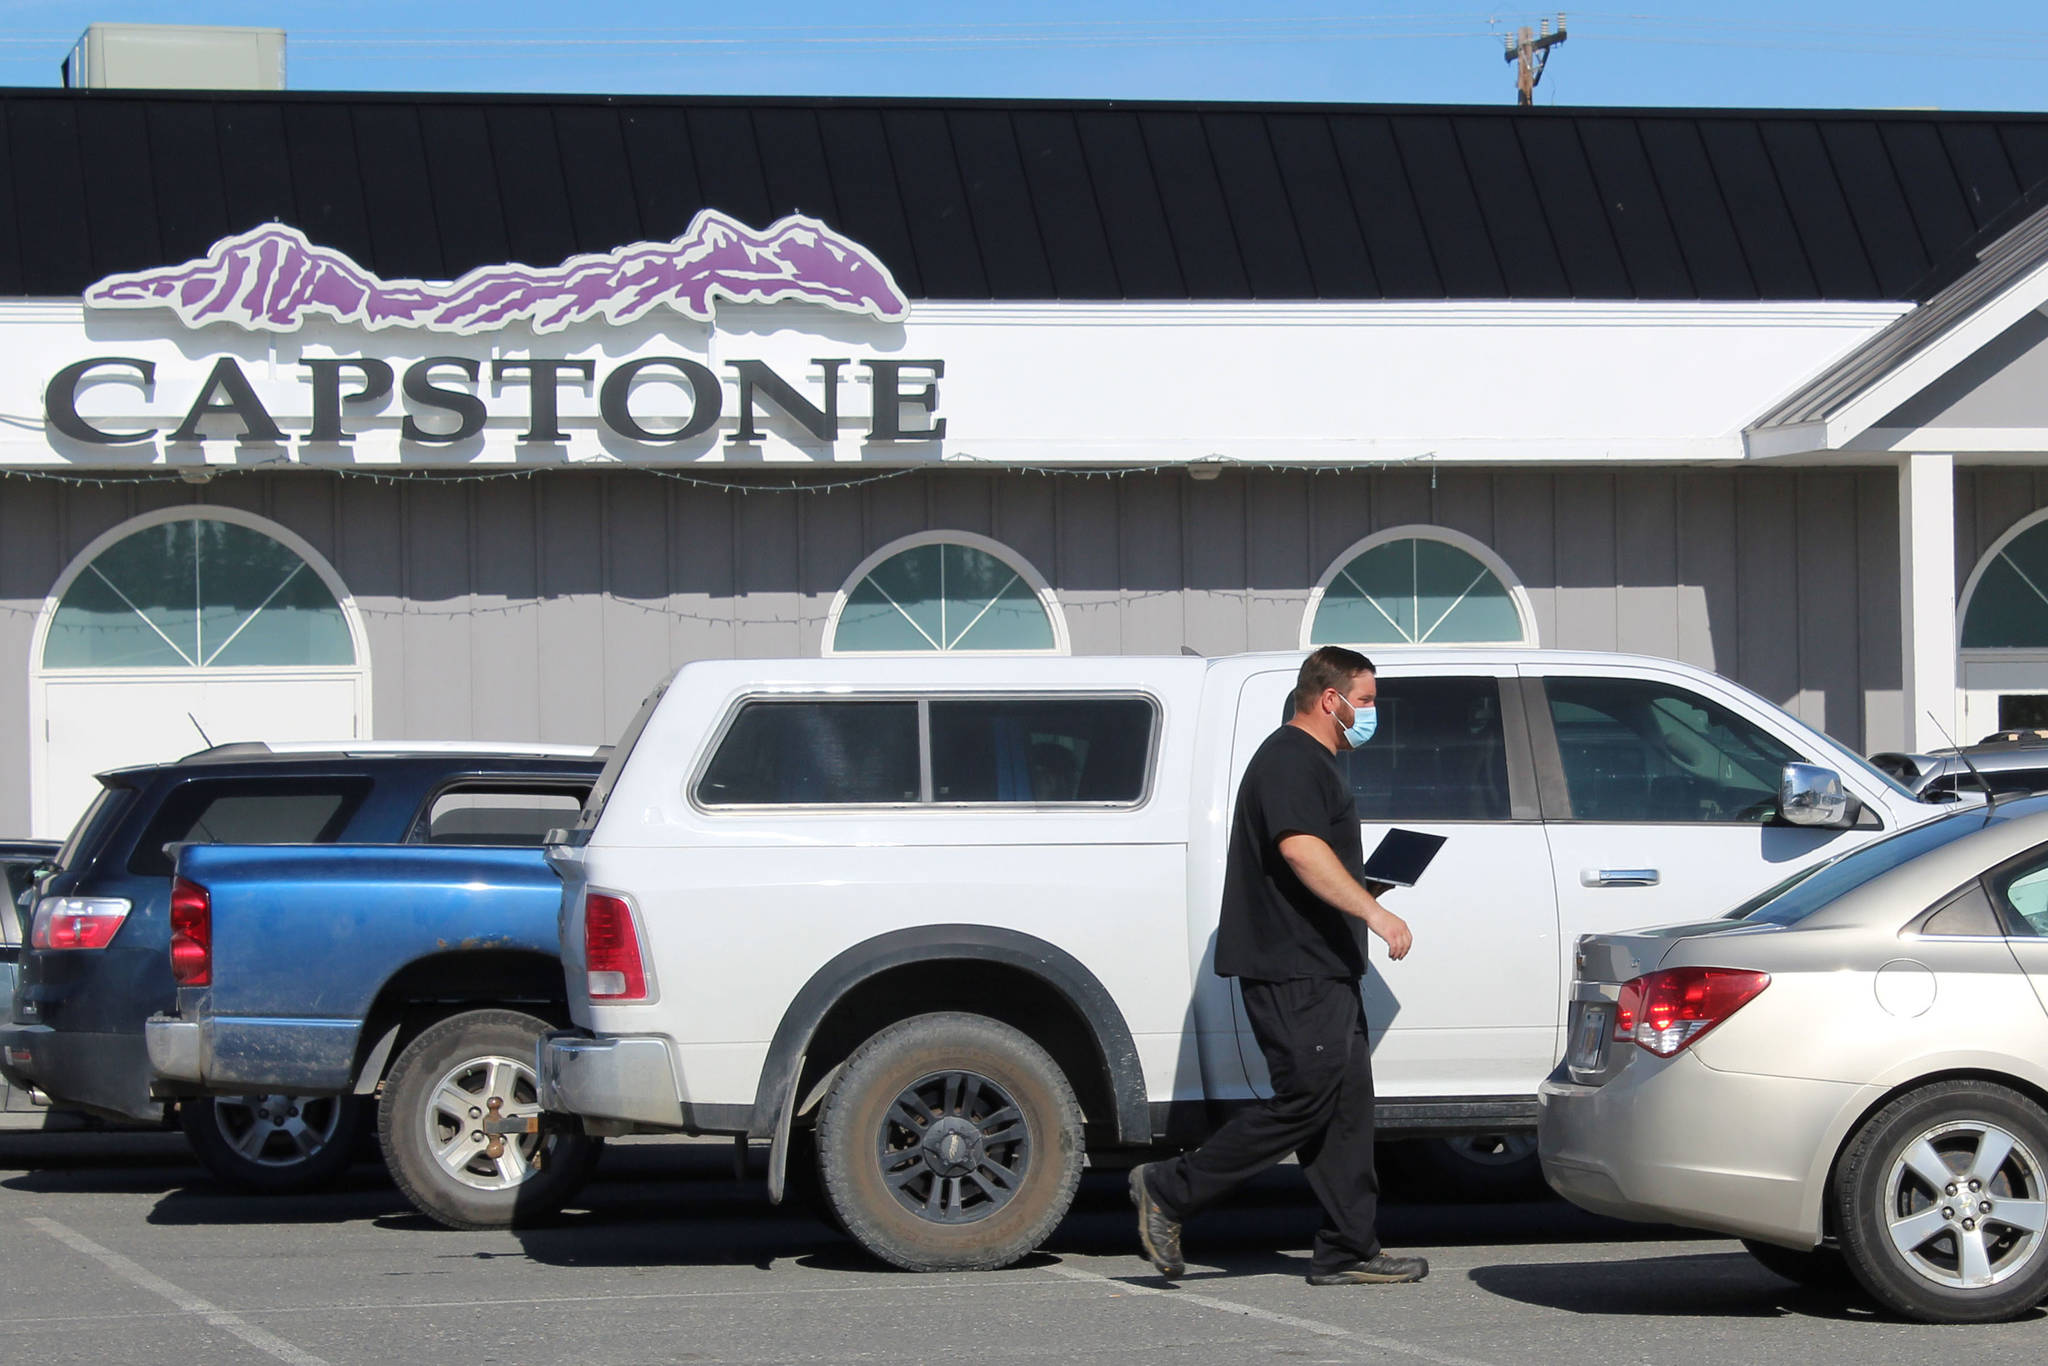 Cars wait outside Capstone Clinic in Kenai, where COVID-19 testing is being offered, on Monday, Aug. 30, 2021 in Kenai, Alaska. The line at Capstone wound through the nearby Three Bears parking lot. (Ashlyn O’Hara/Peninsula Clarion)